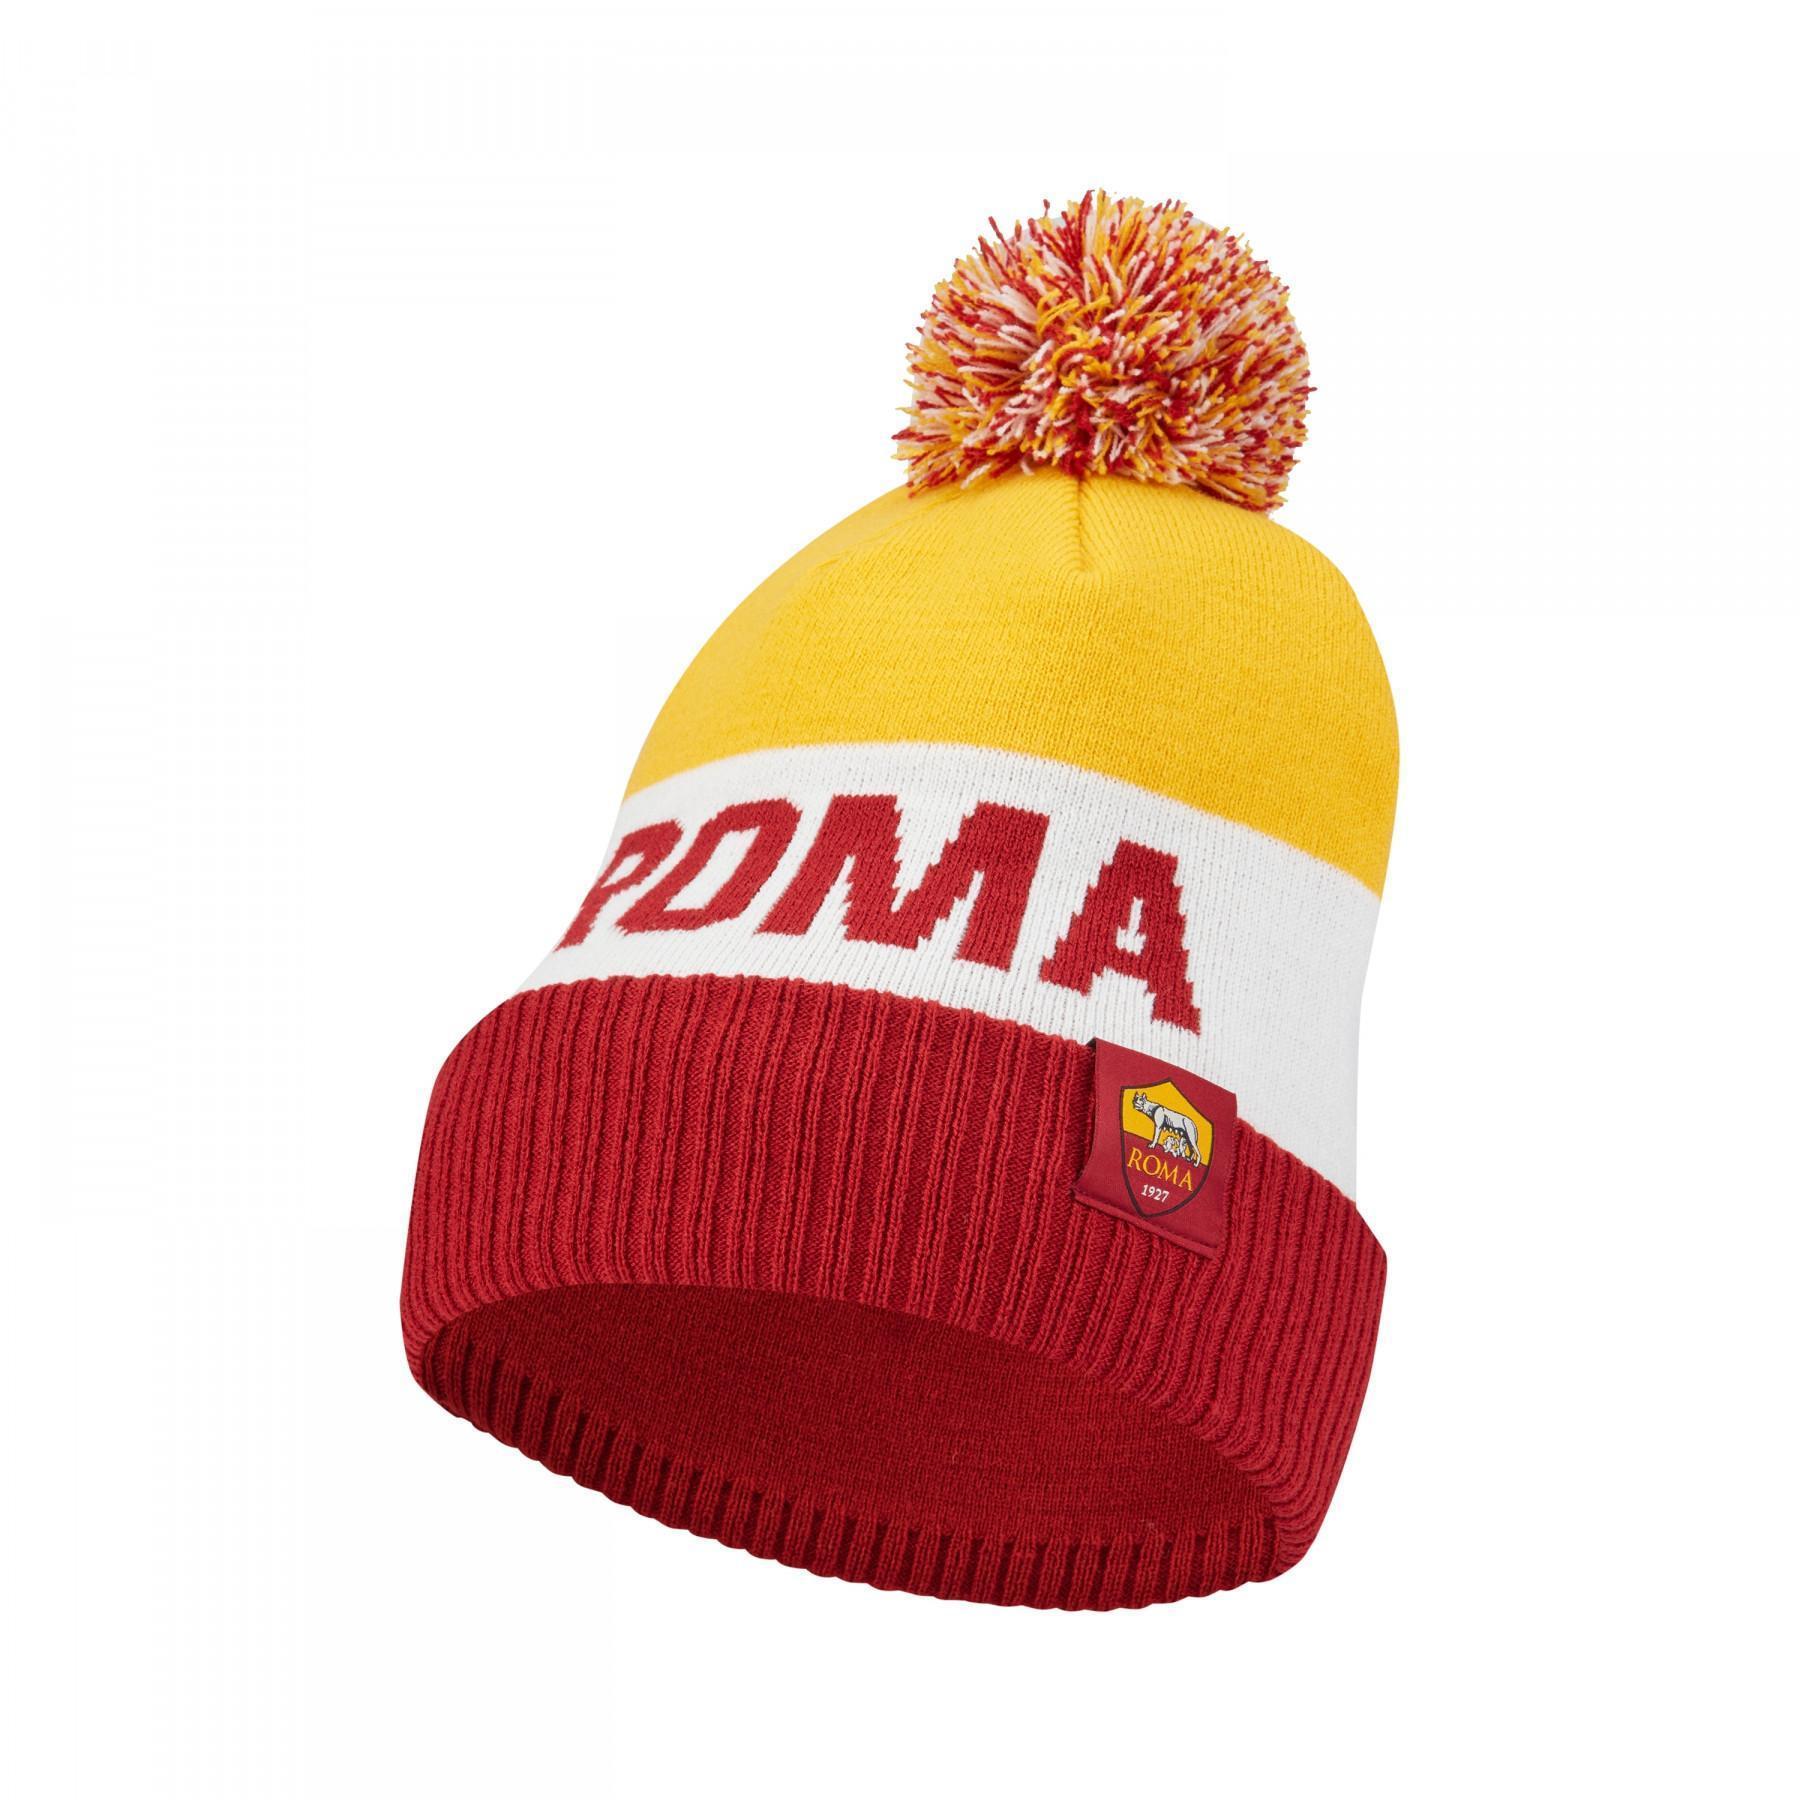 Bonnet with pompon AS Roma clear 2020/21